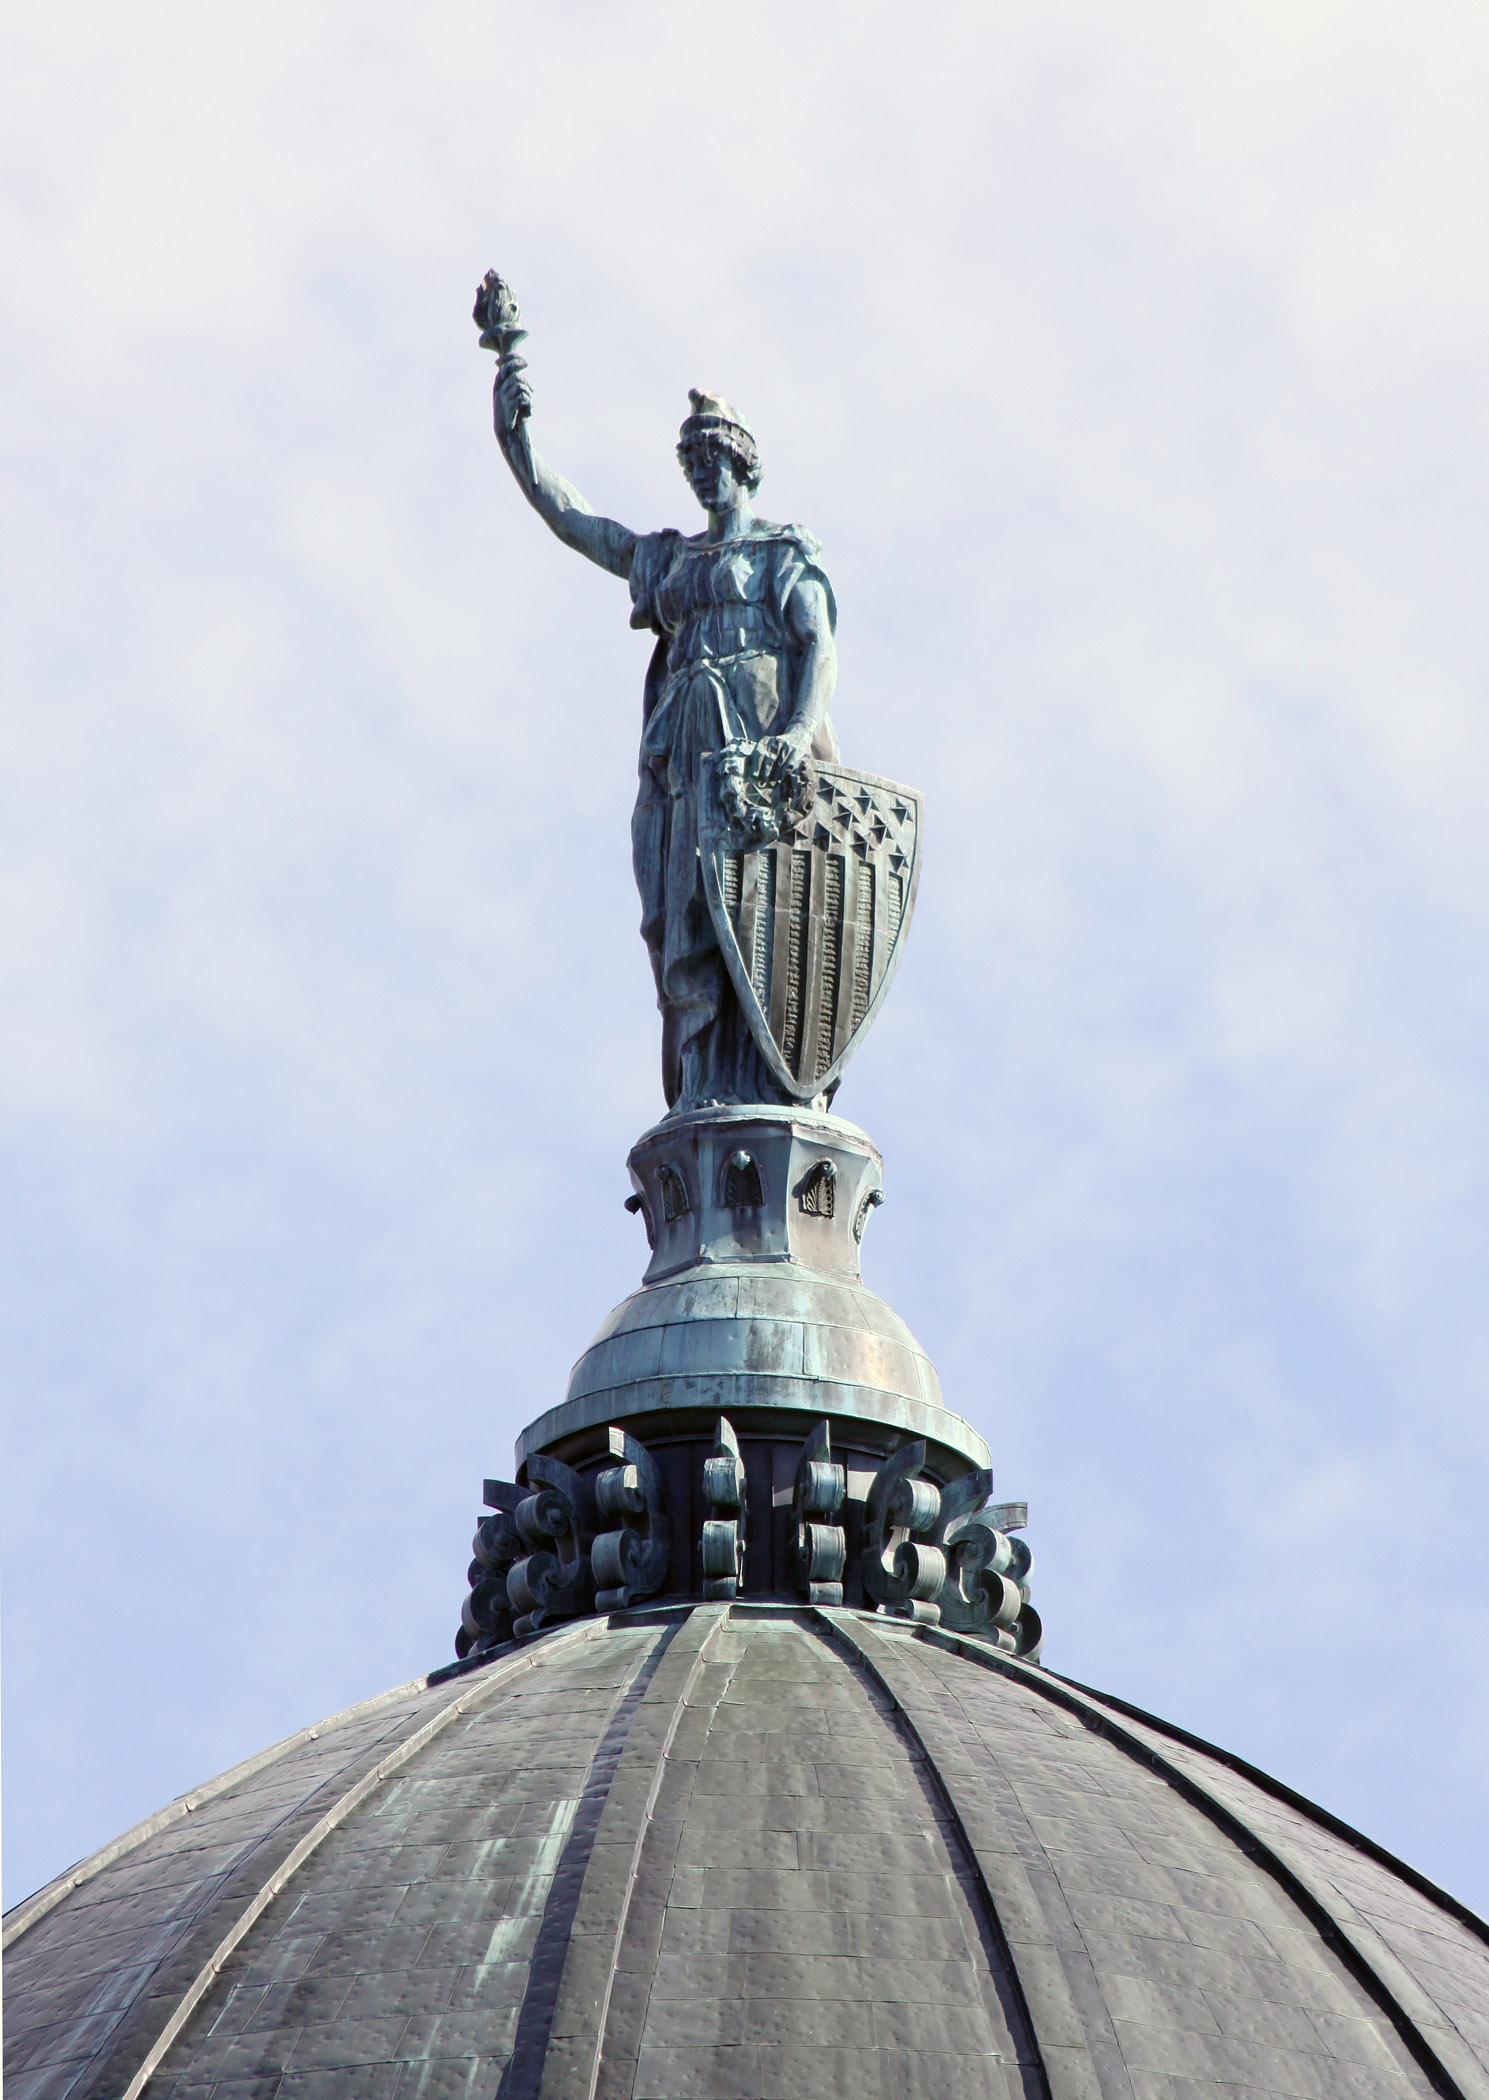 A photograph of the statue named Montana